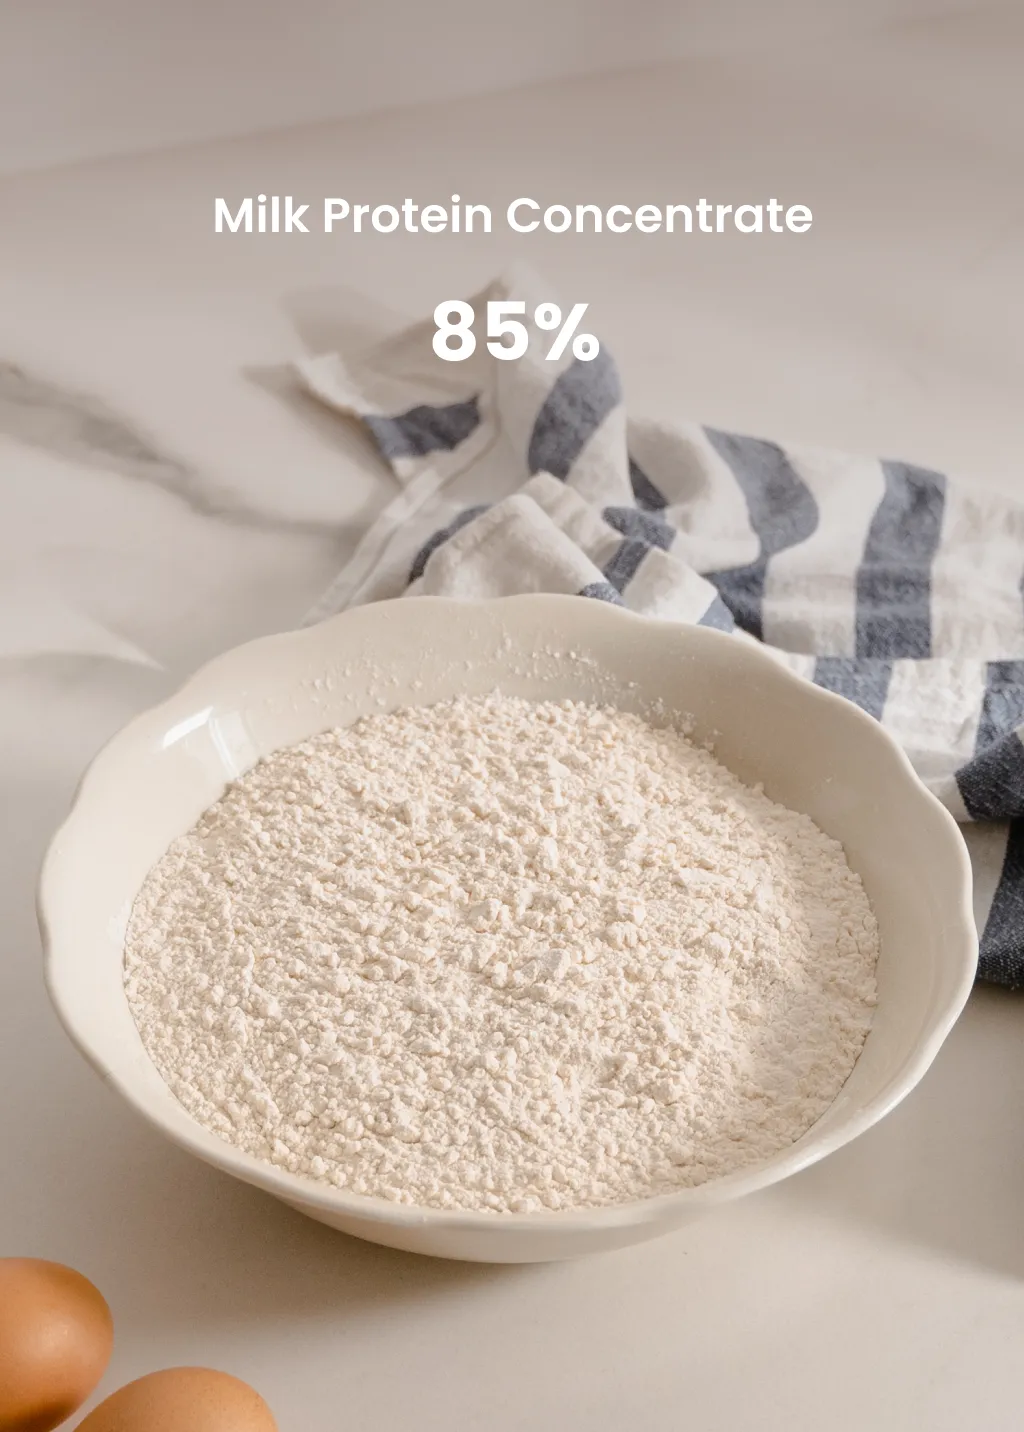 Milk Powder Concentrate 85% from Milk Powder Asia